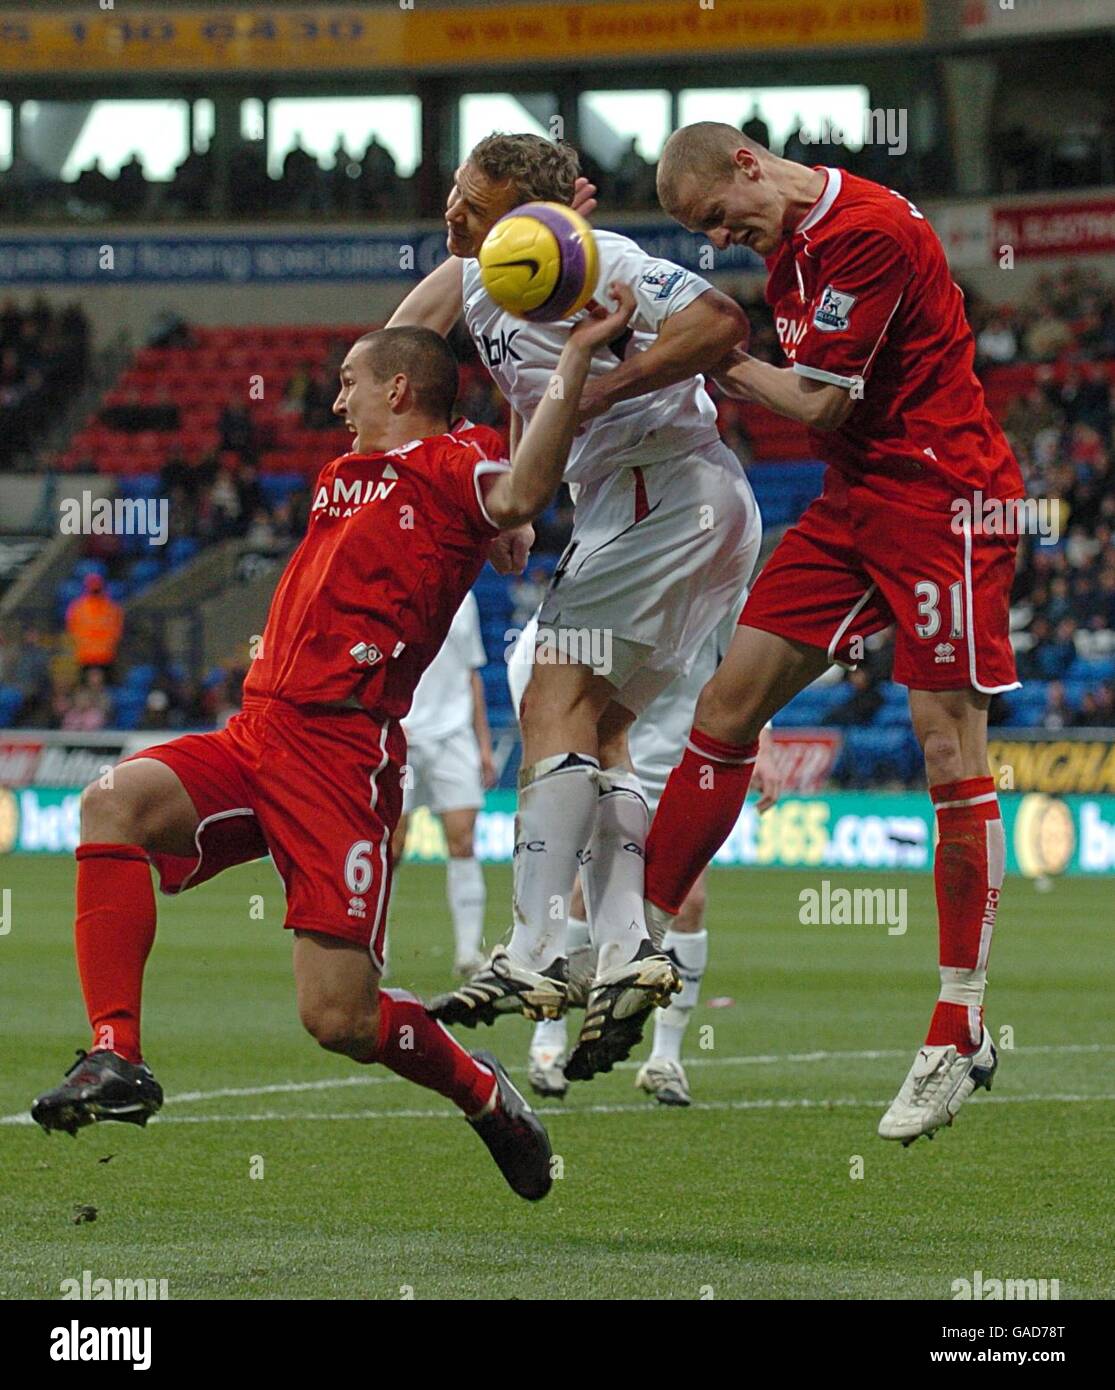 Soccer - Barclays Premier League - Bolton Wanderers v Middlesbrough - Reebok Stadium. Bolton Wanderers' Kevin Davies (c) competes with Middlesbrough's David Wheater (r) and Emanuel Pogatetz for the ball Stock Photo